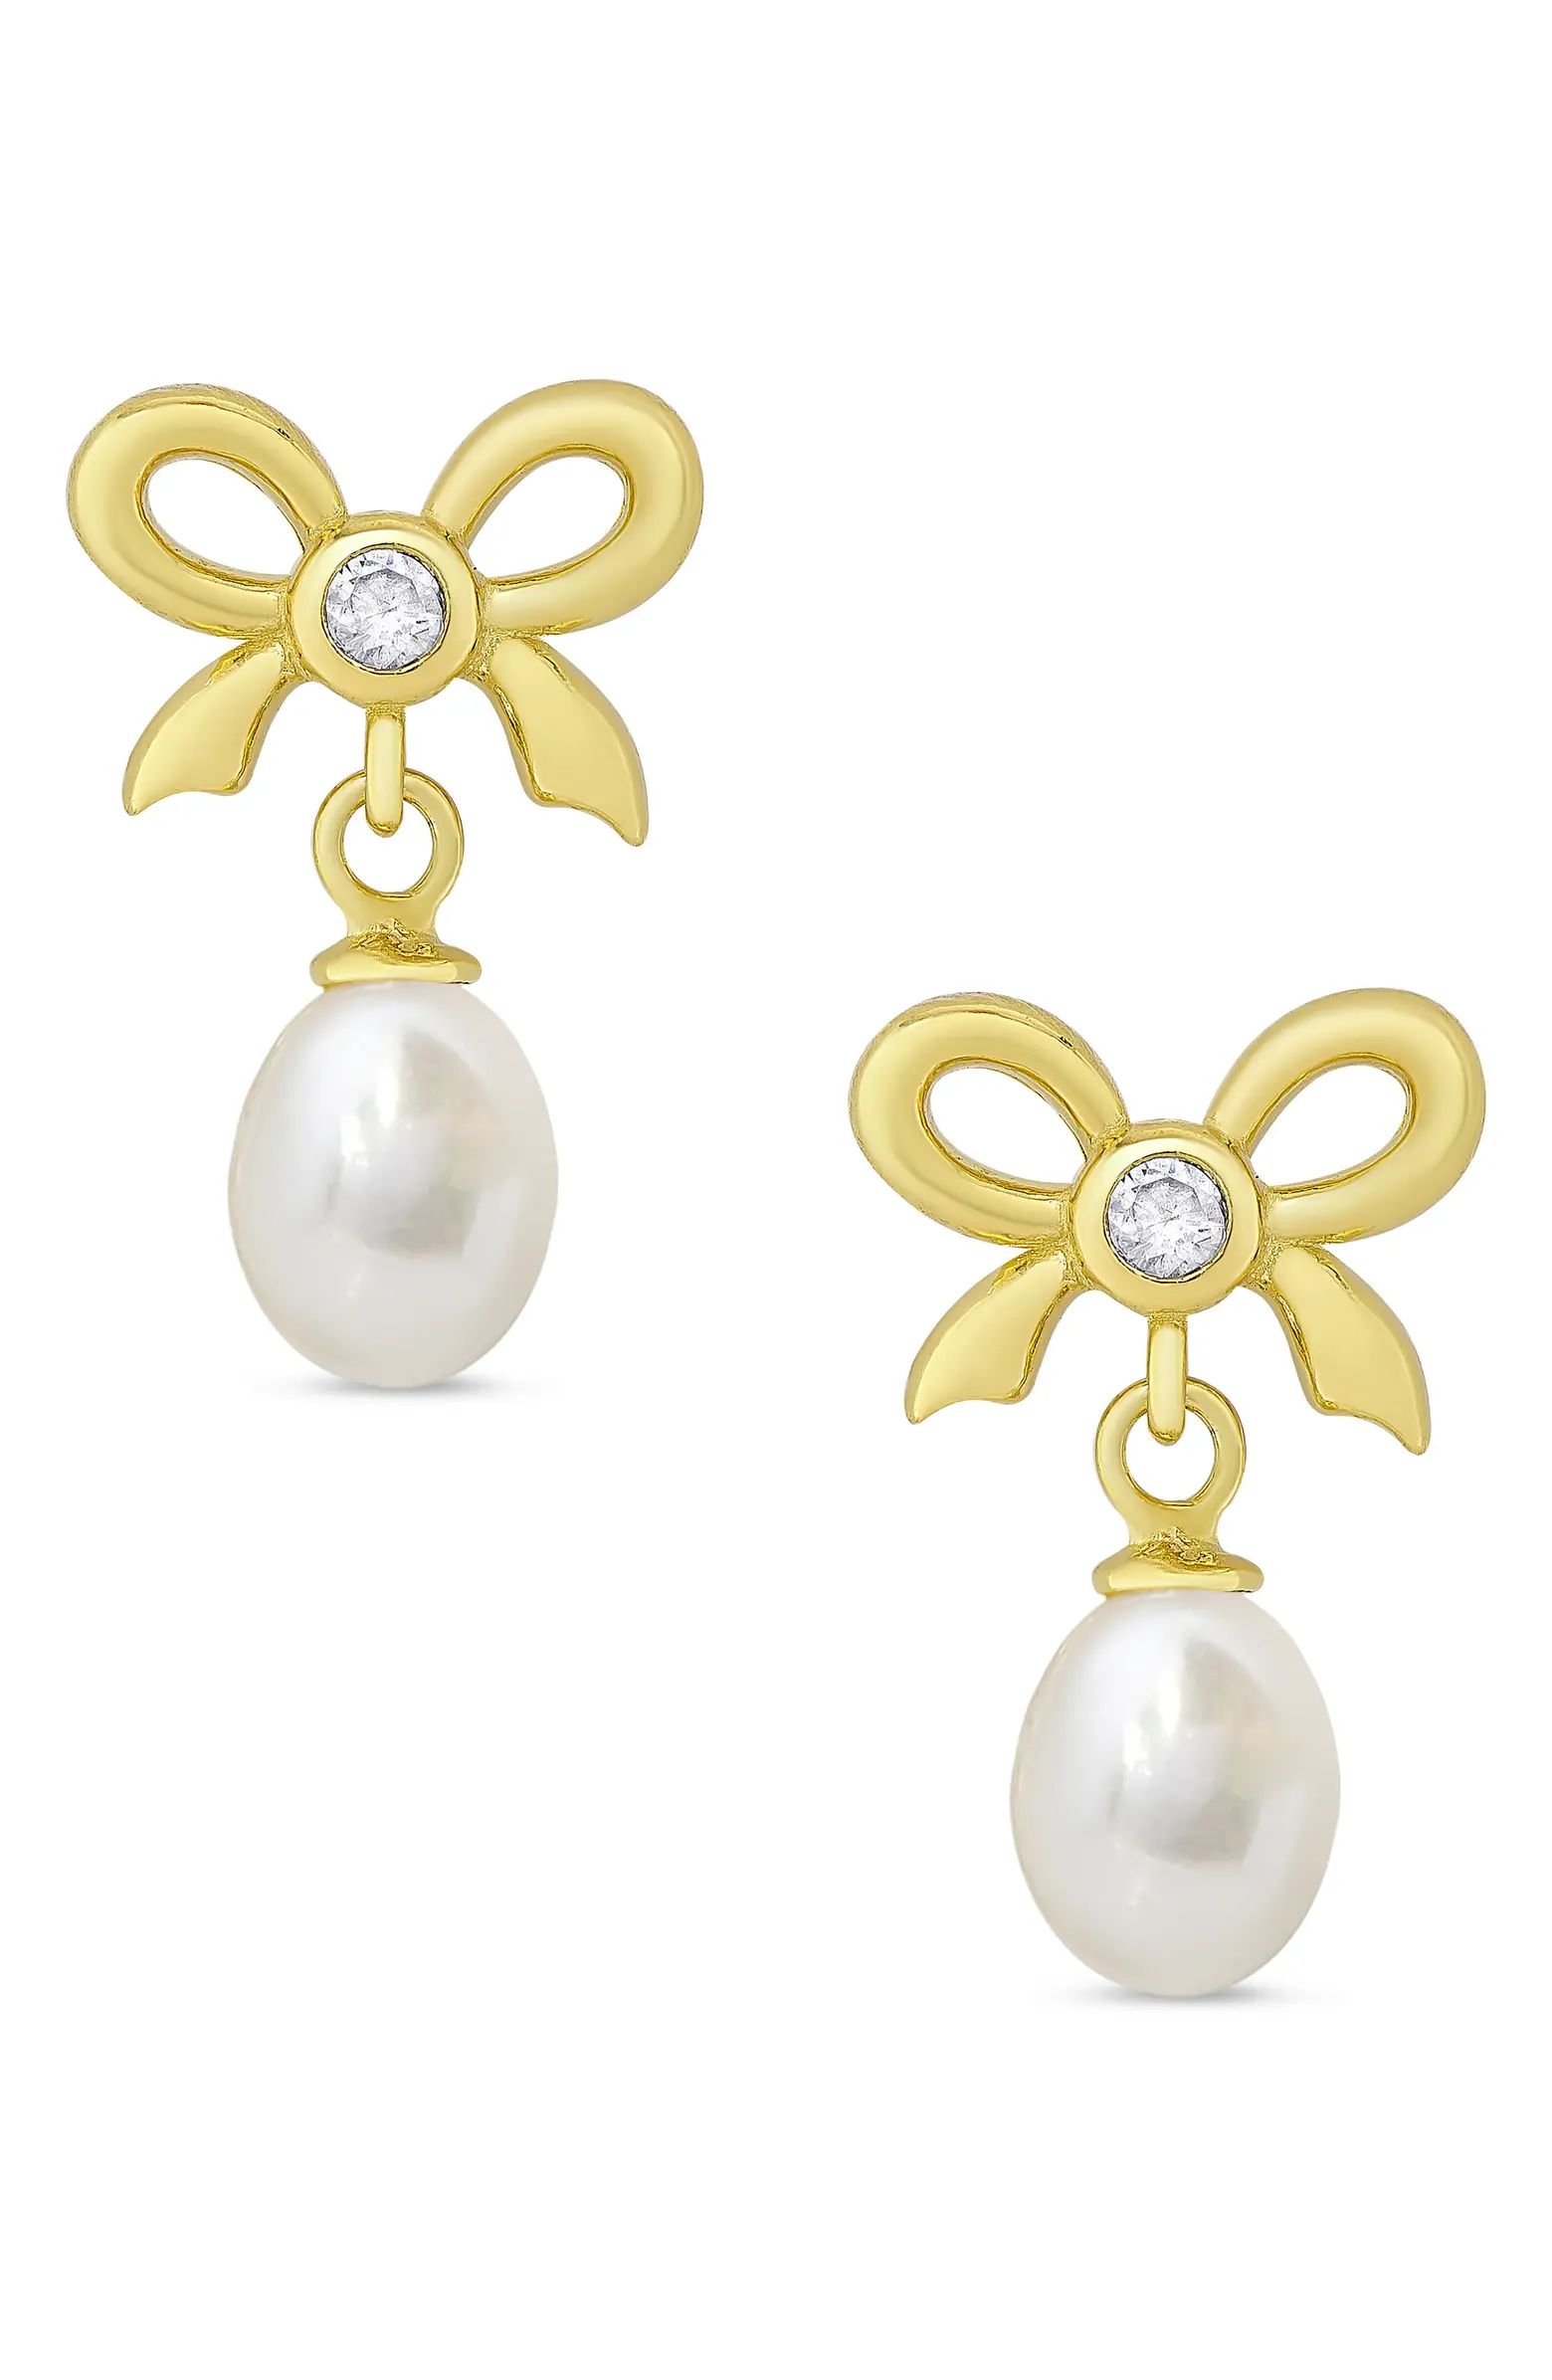 Lily Nily Kids' Cubic Zirconia & Pearl Bow Drop Earrings | Nordstrom | Nordstrom